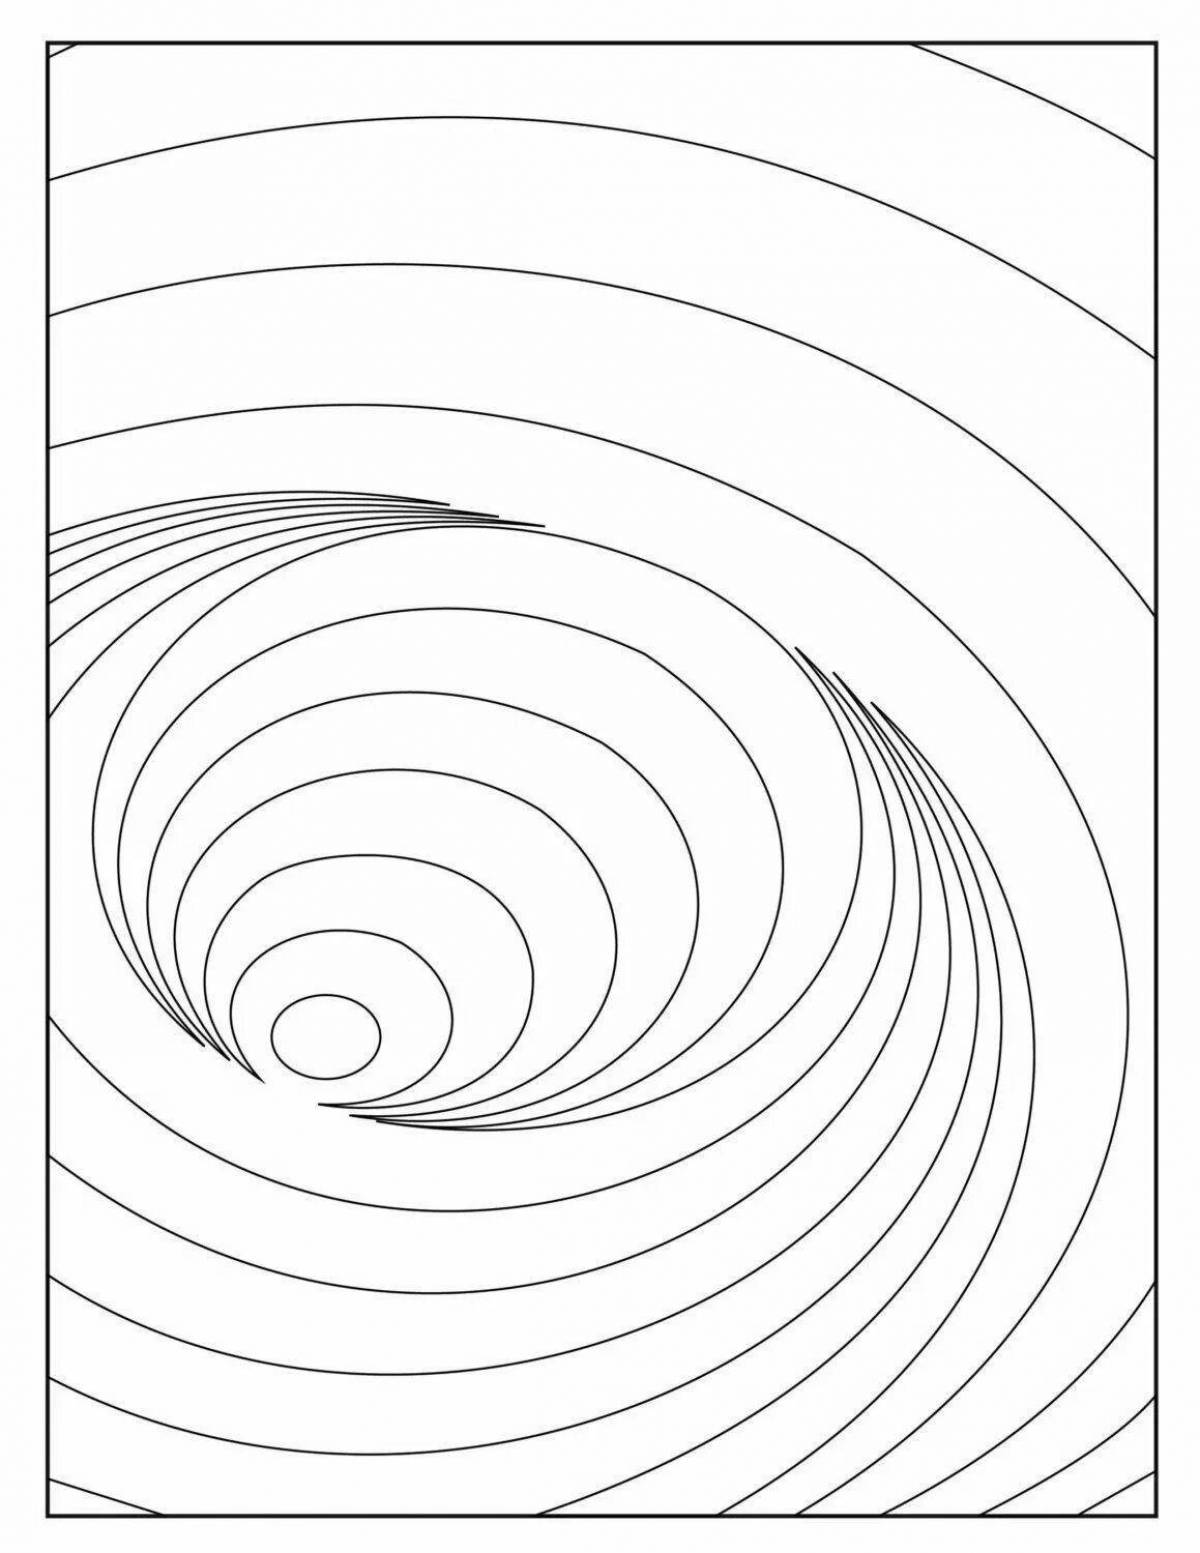 Glitter spiral lines coloring book